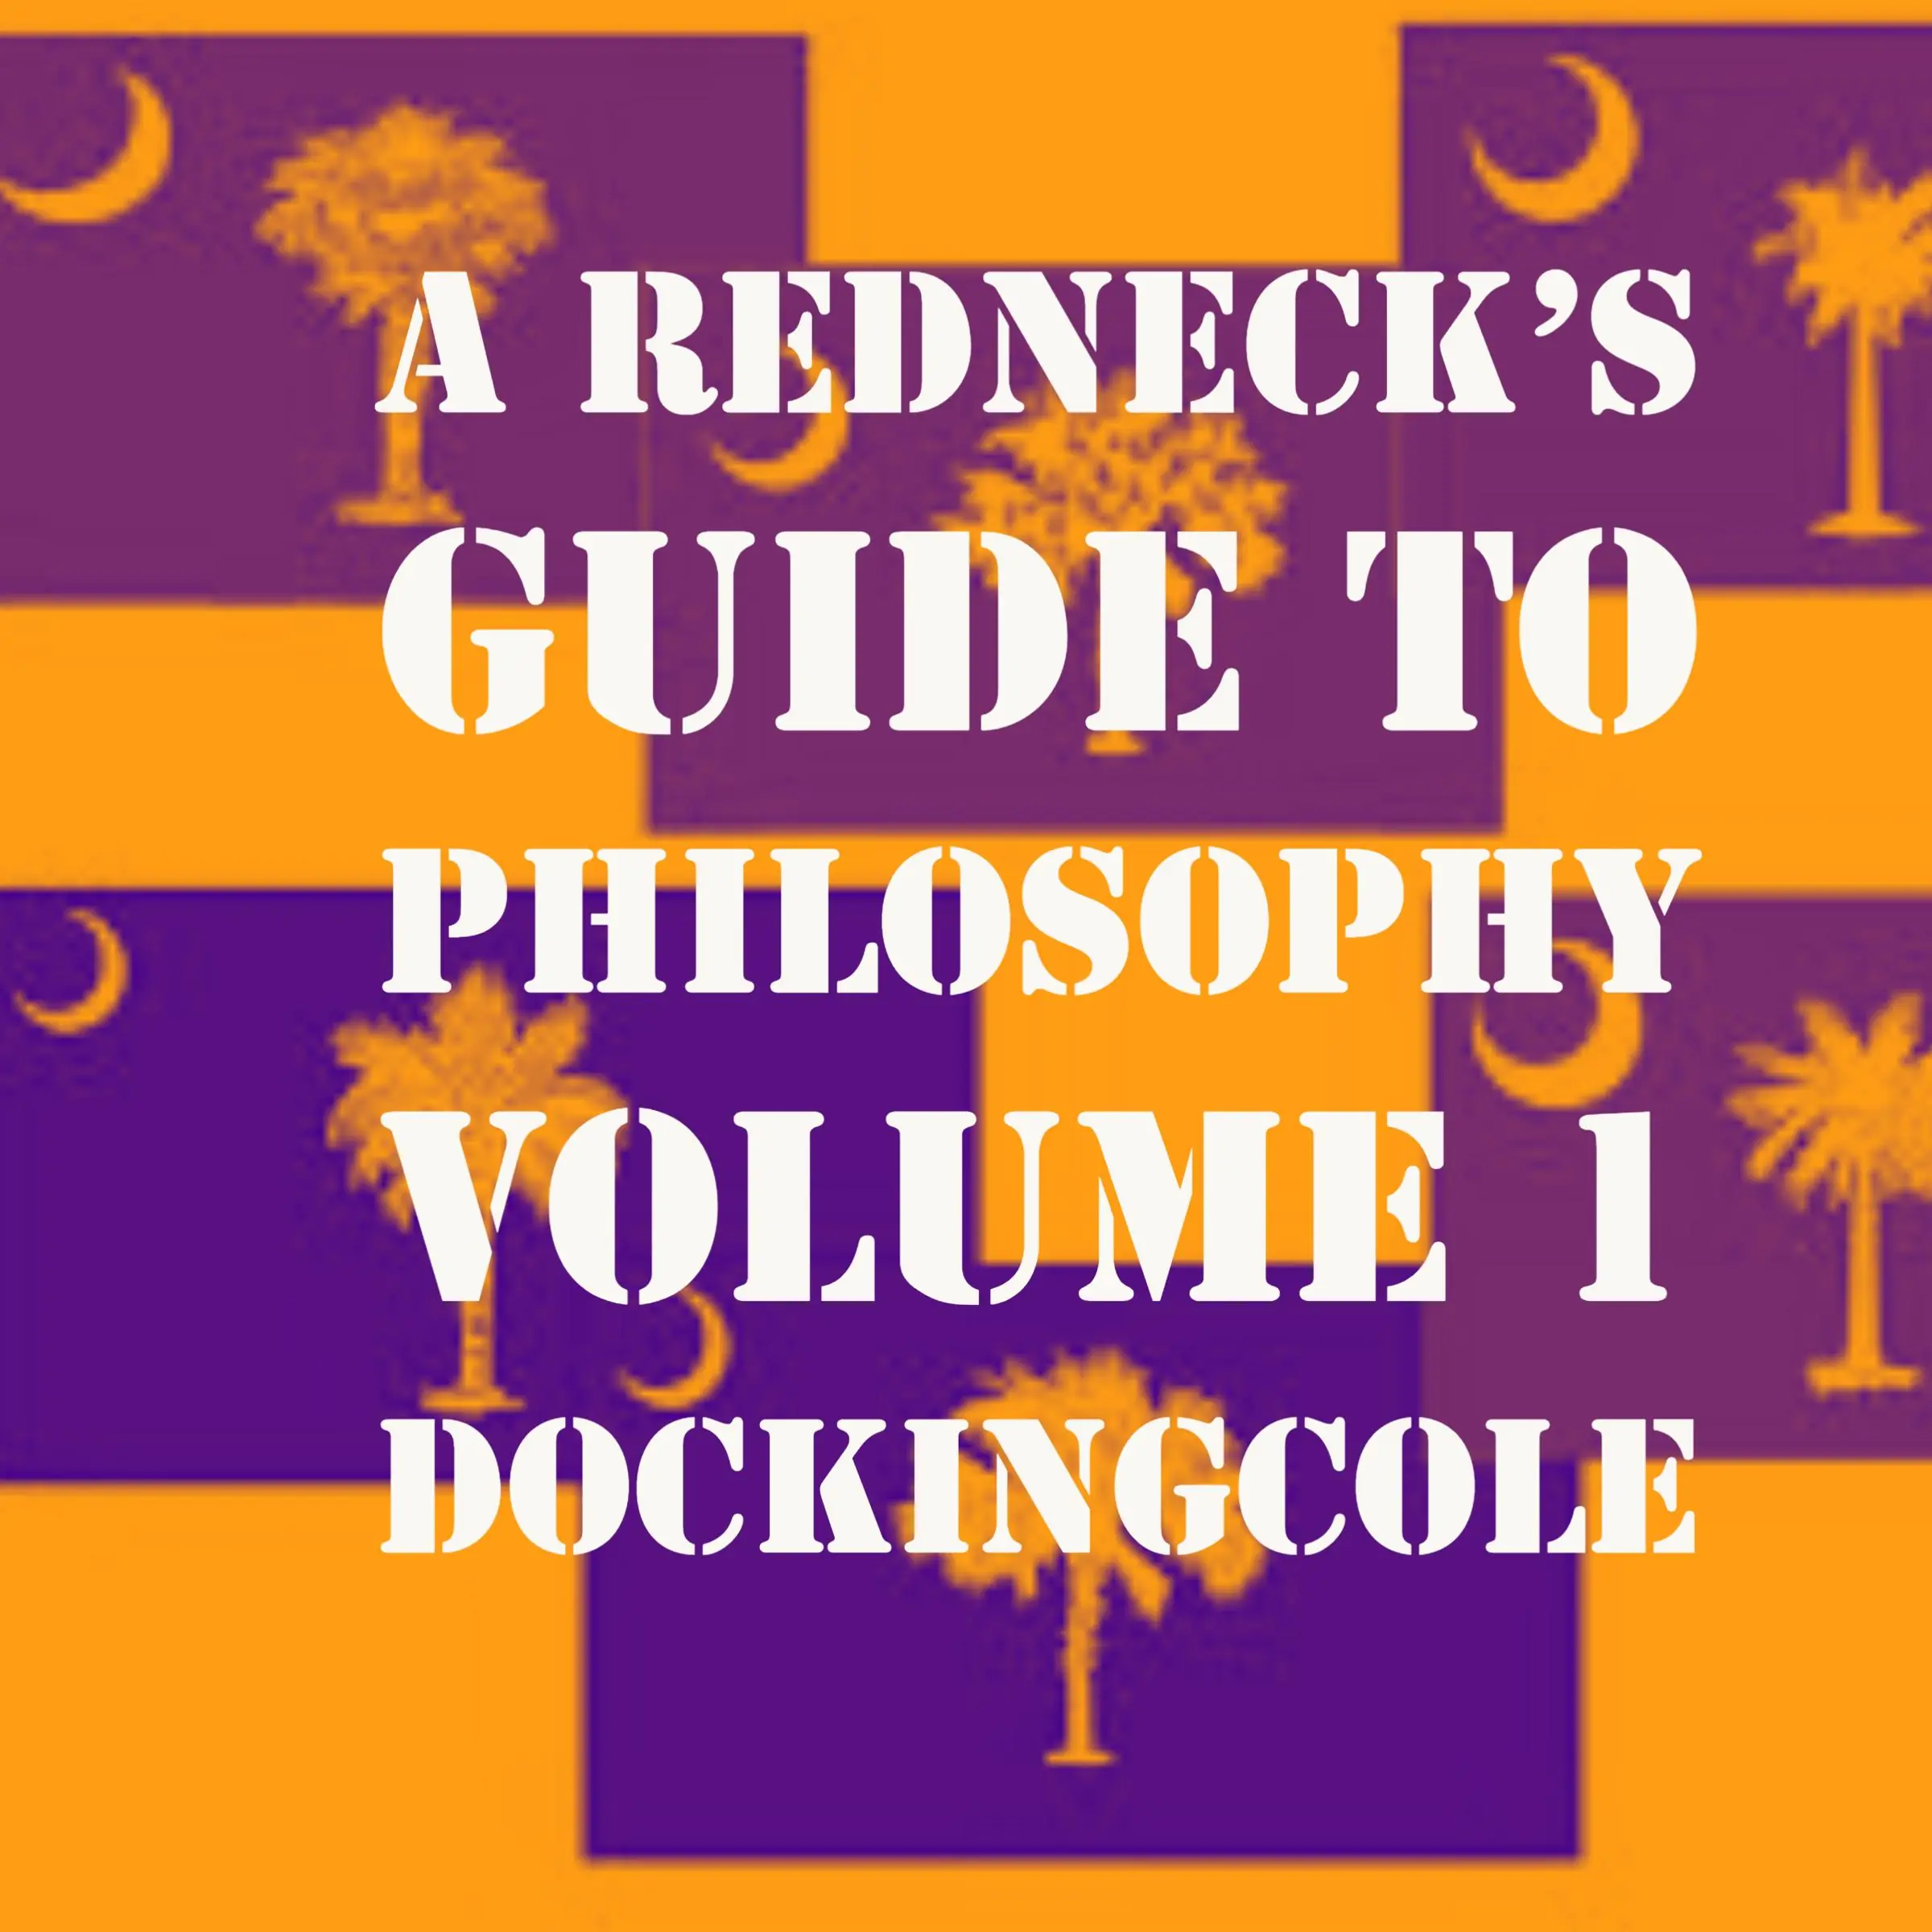 A RedNeck's Guide to Philosophy Volume 1 Audiobook by Doc King Cole